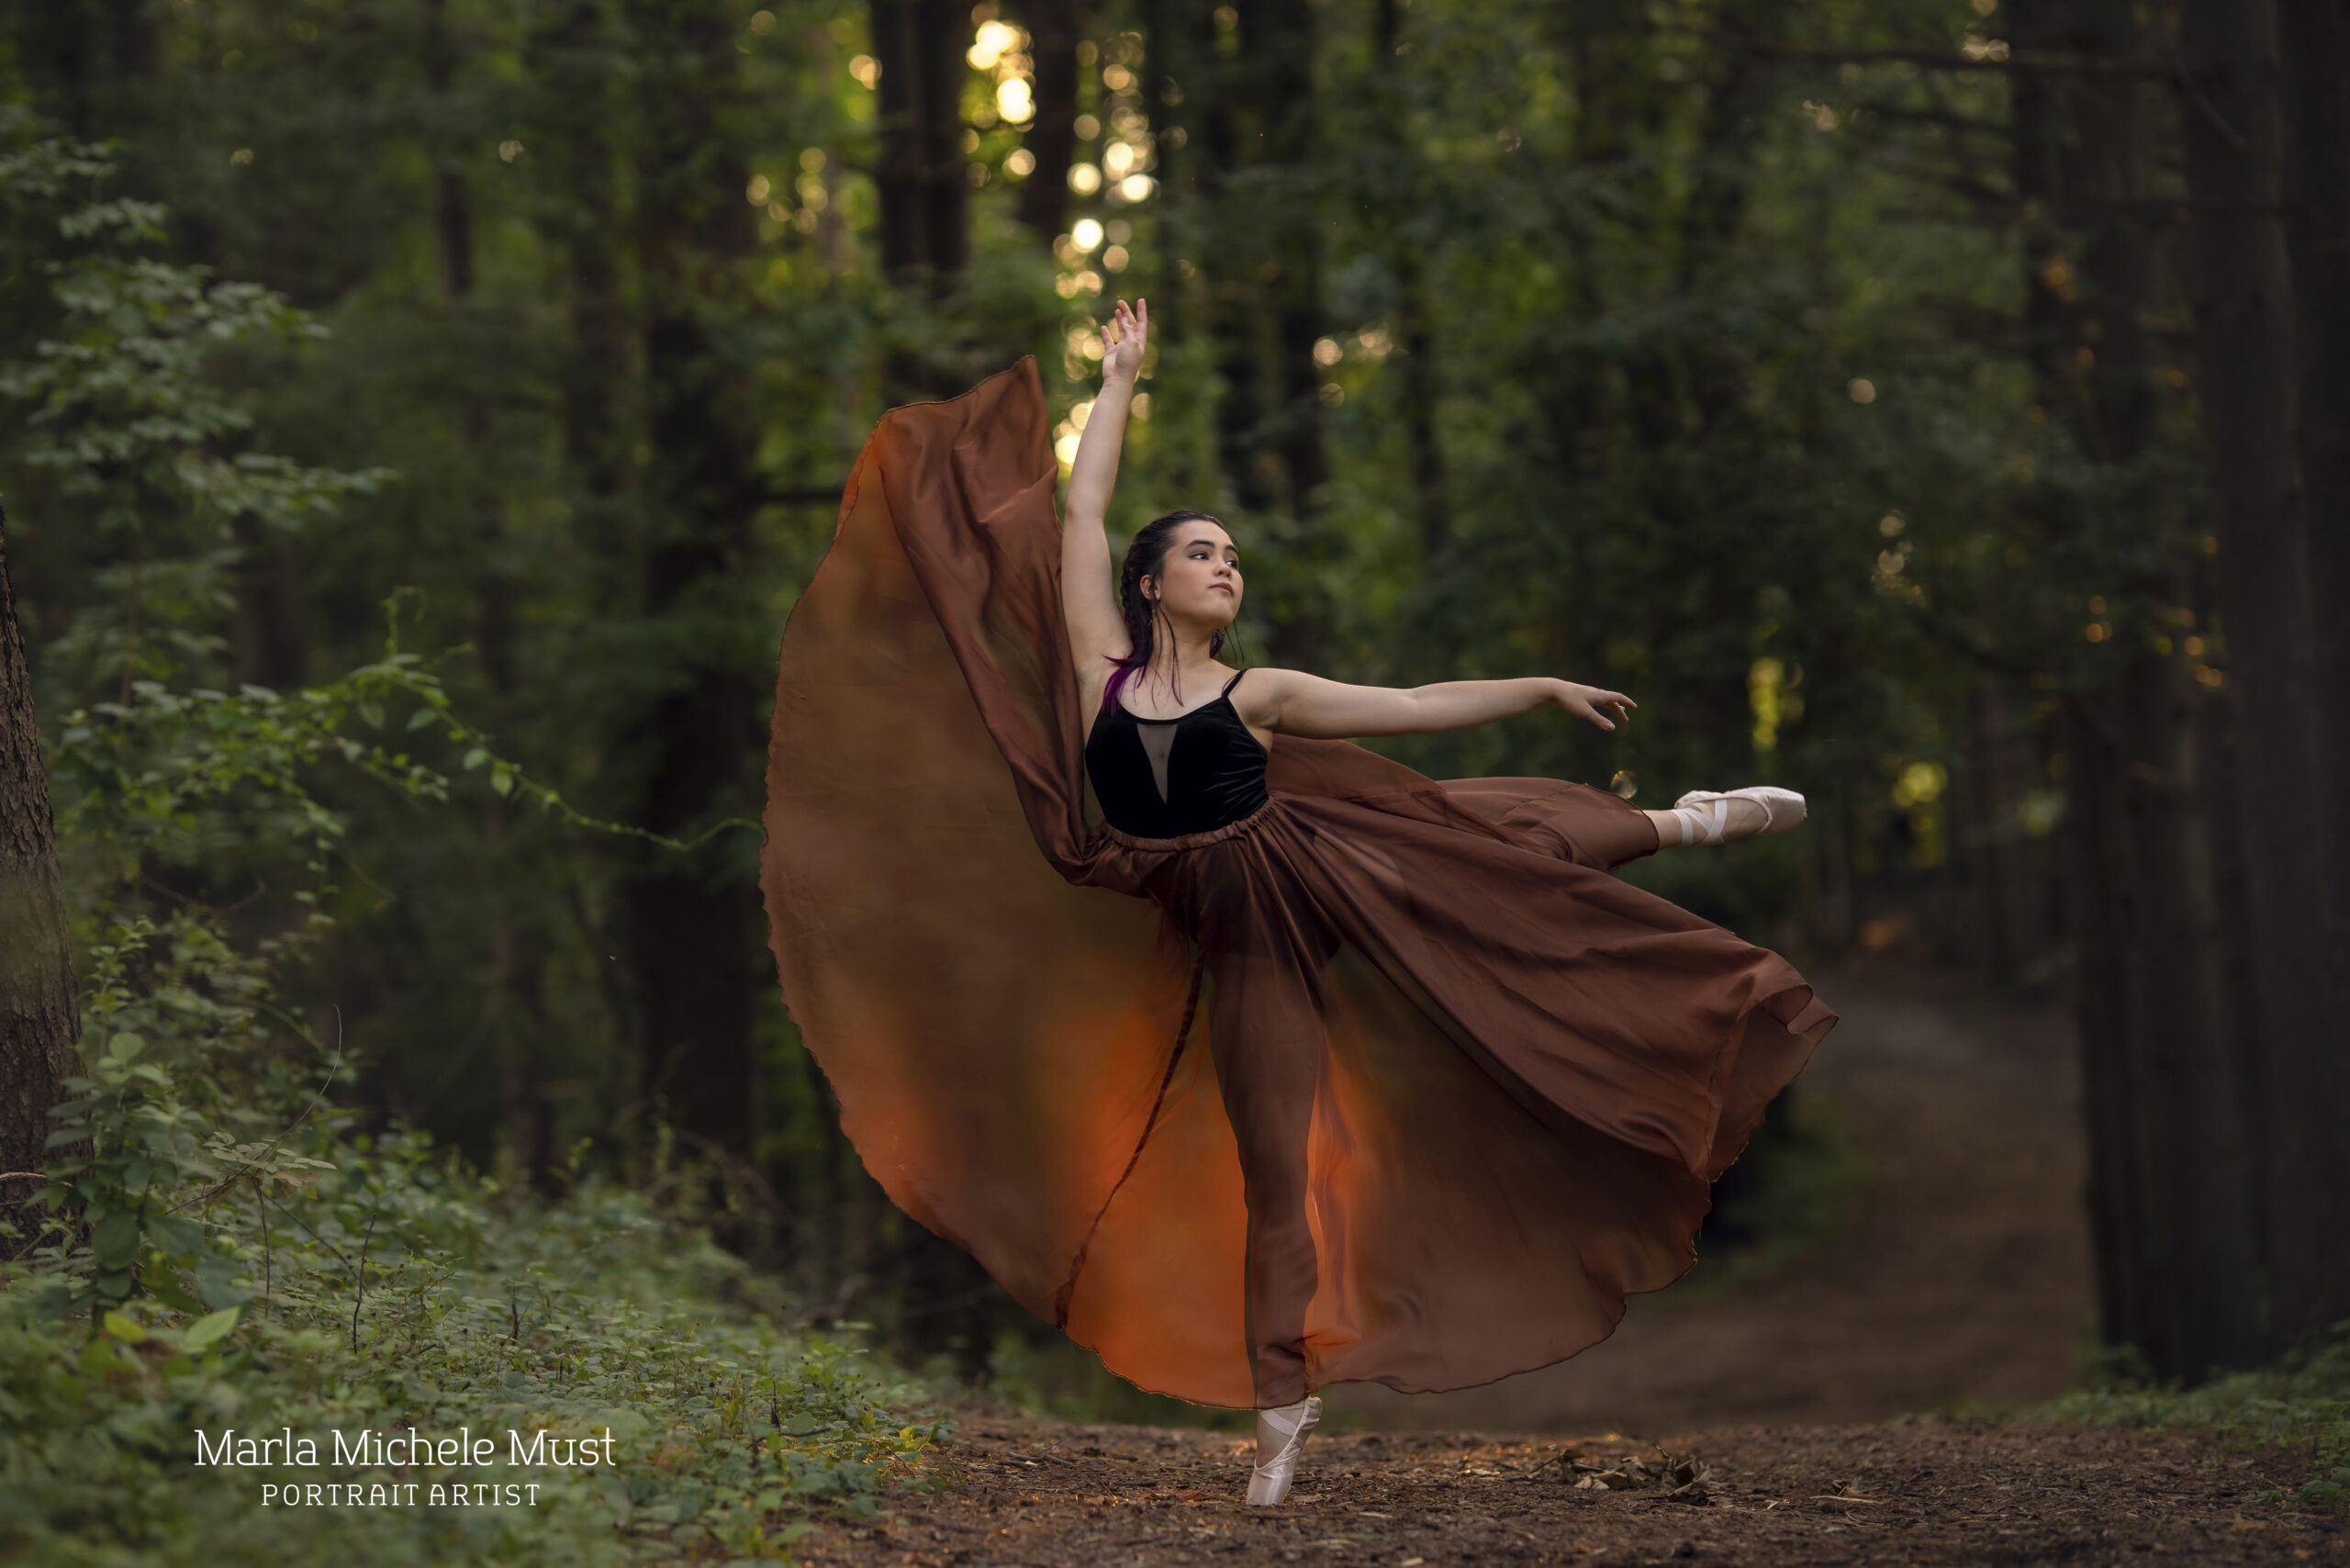 Dancer with flowy dress in a Detroit forest during a dance photoshoot